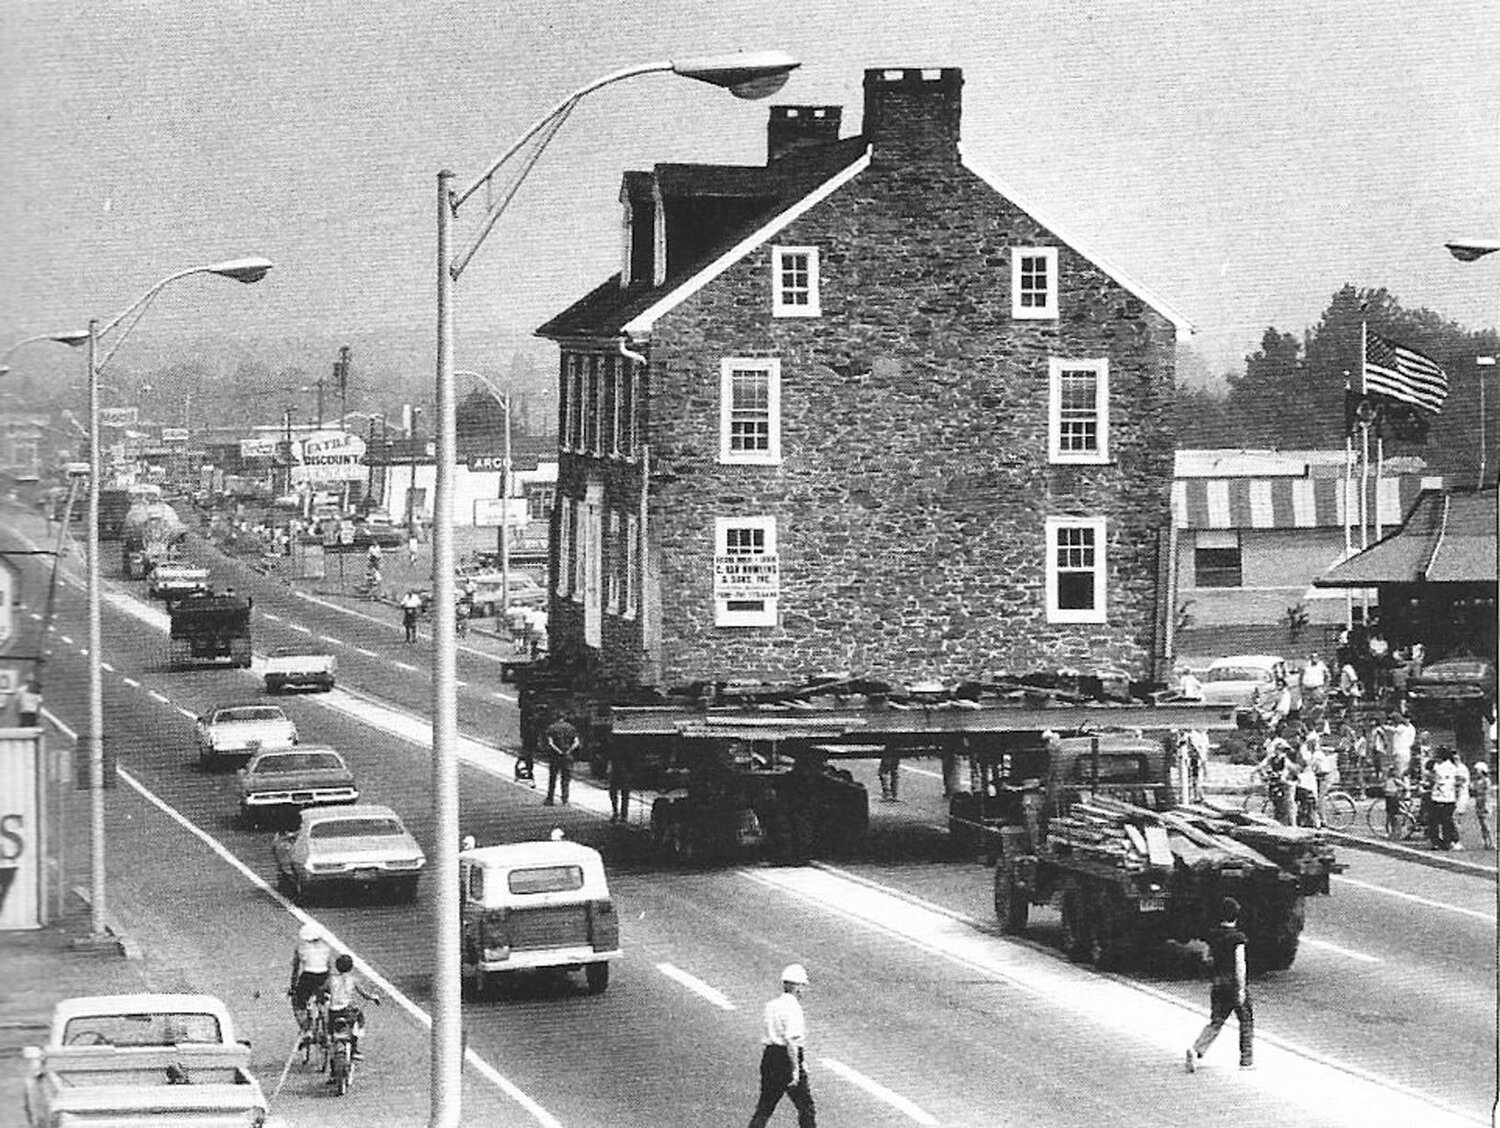 In 1974, Quakertown Historical Society raised the $40,000 it needed to save the Burgess Folke House by having it moved to clear the way for the Country Square Shopping Center.